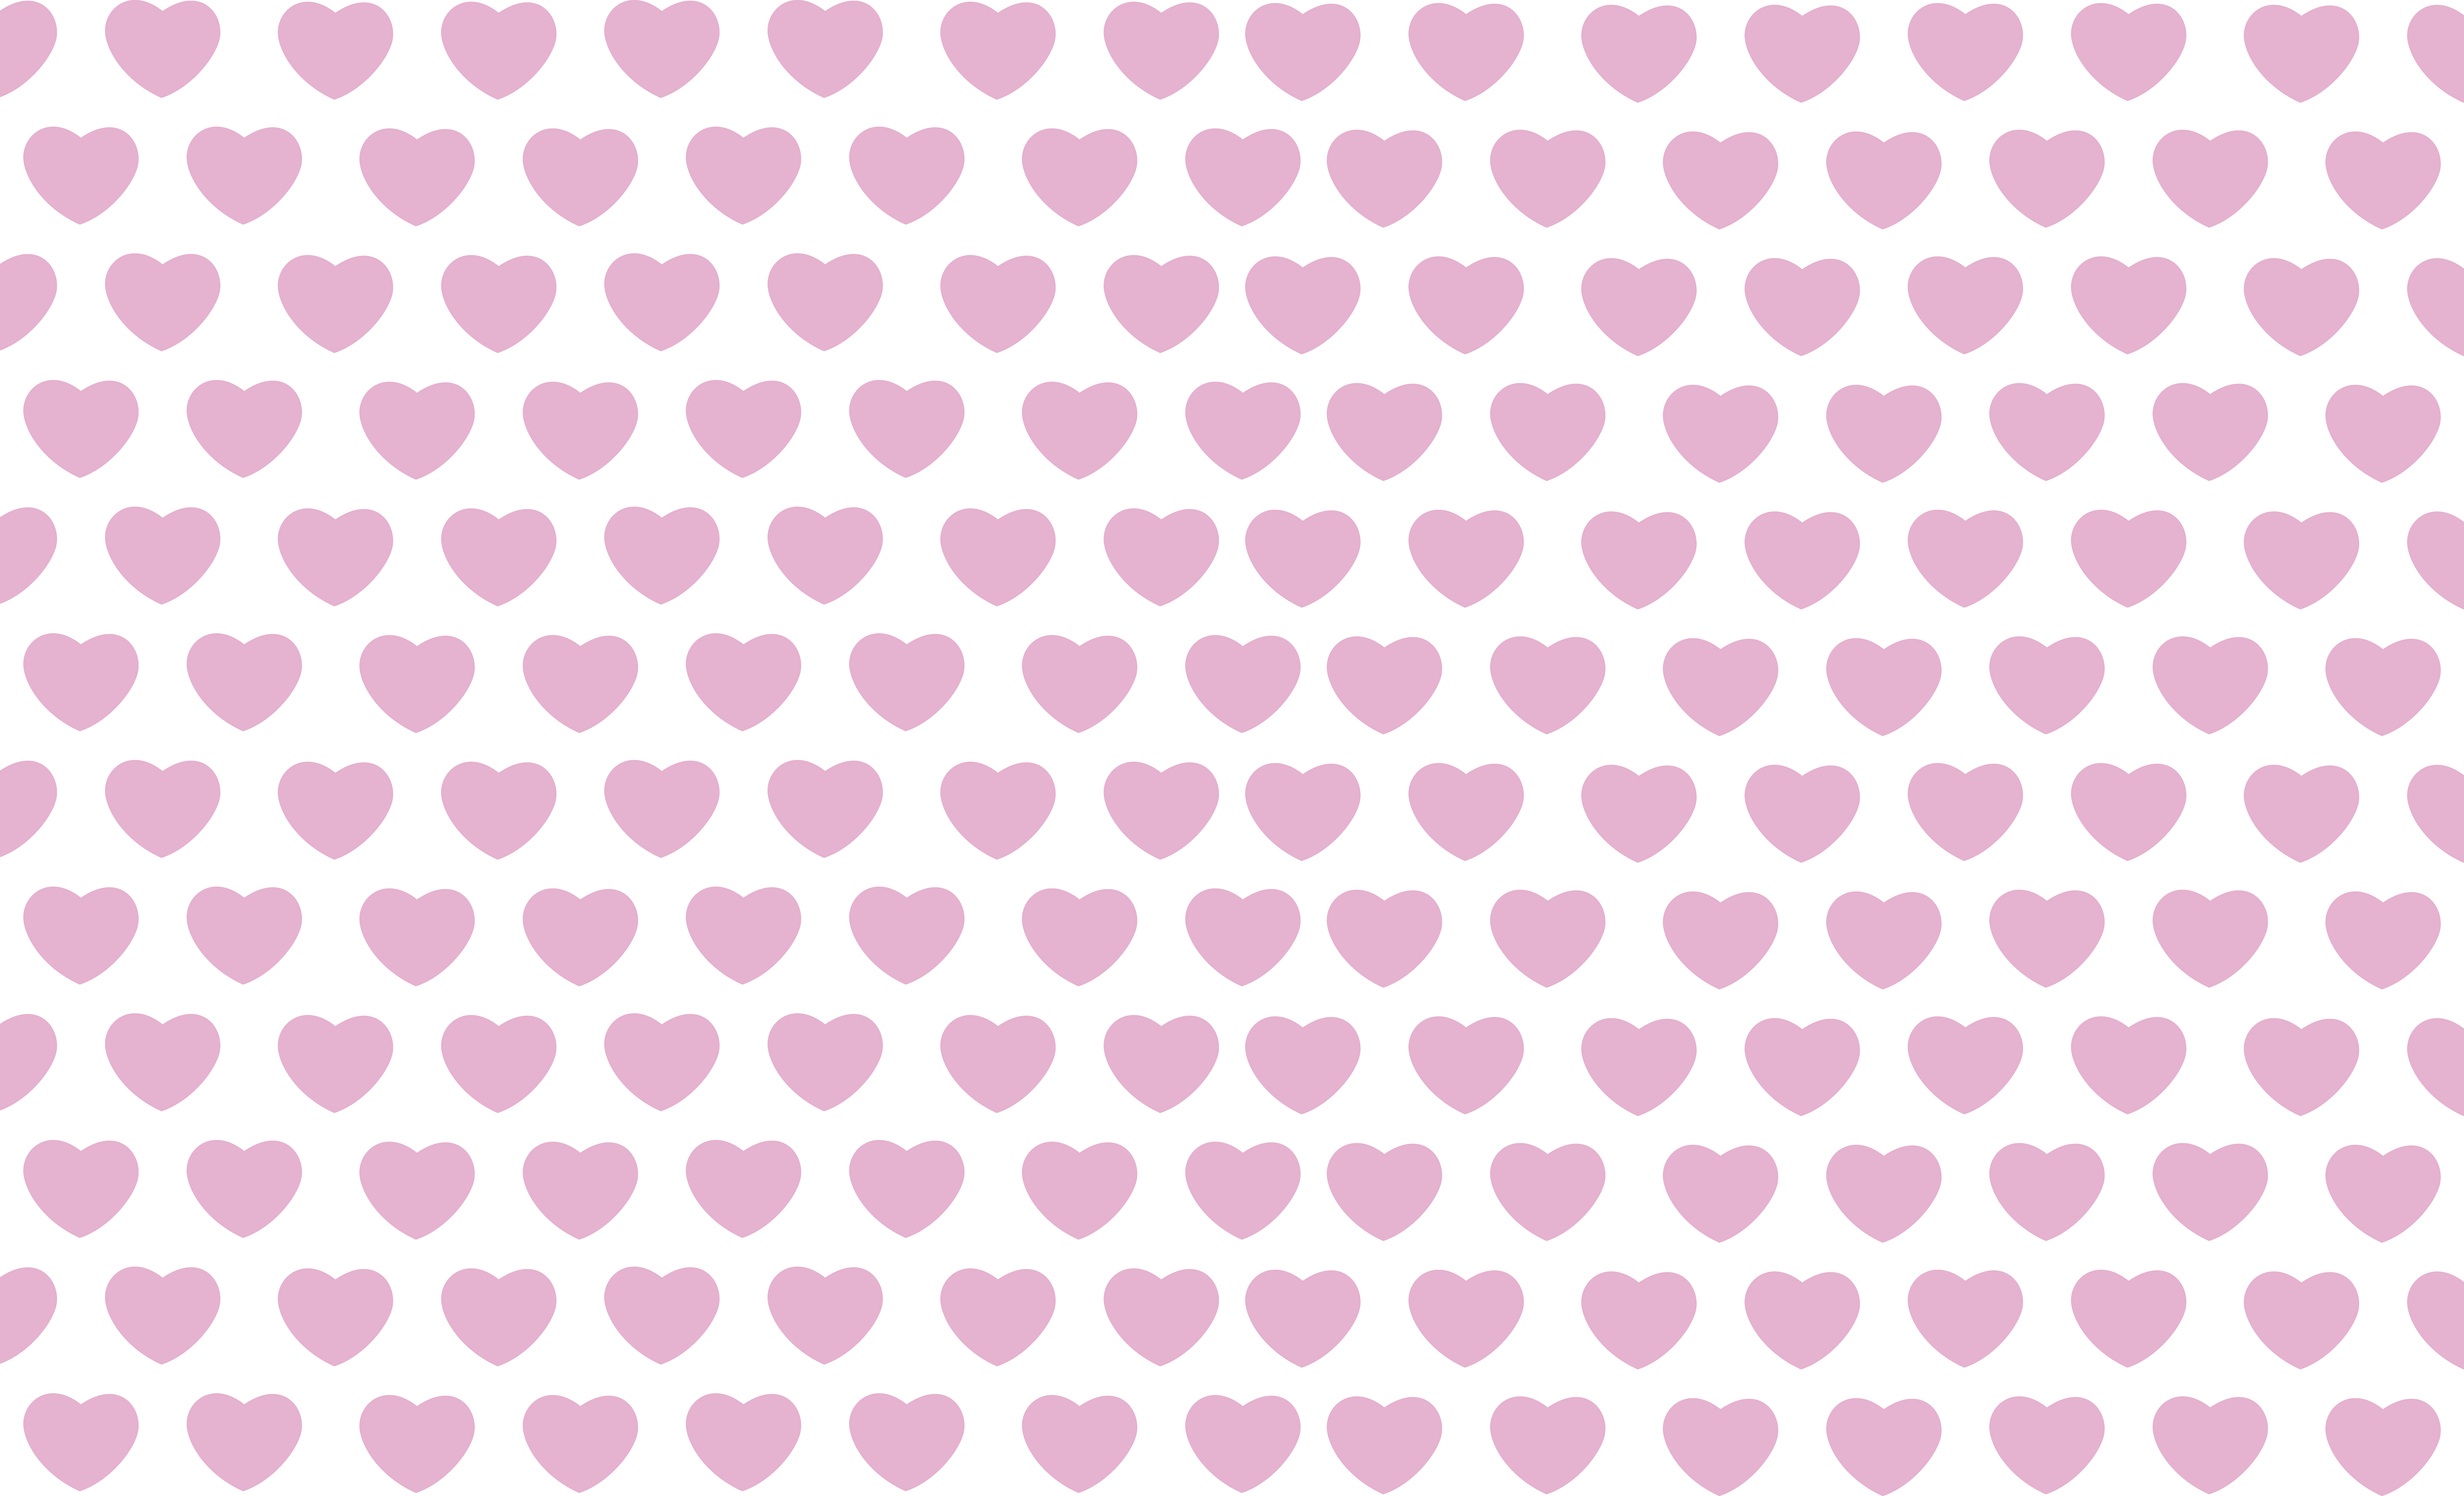 Hearts for Background Transparent Clip Art PNG Image​ | Gallery  Yopriceville - High-Quality Free Images and Transparent PNG Clipart